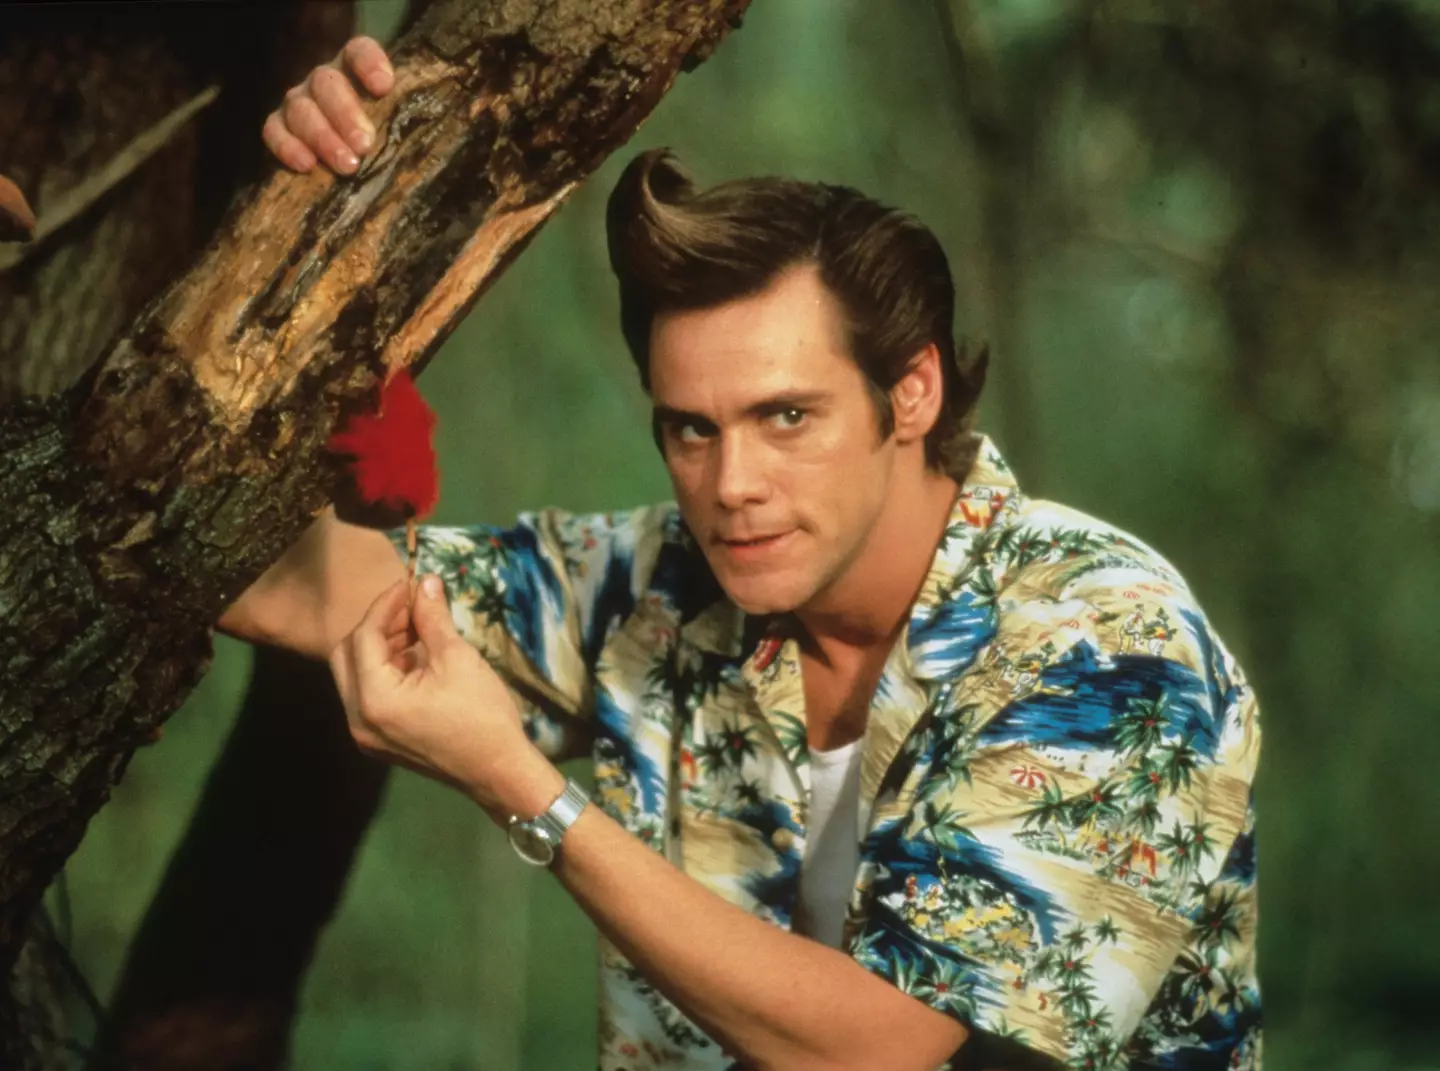 Jim Carrey bought the property in 1994, before Ace Venture was released.